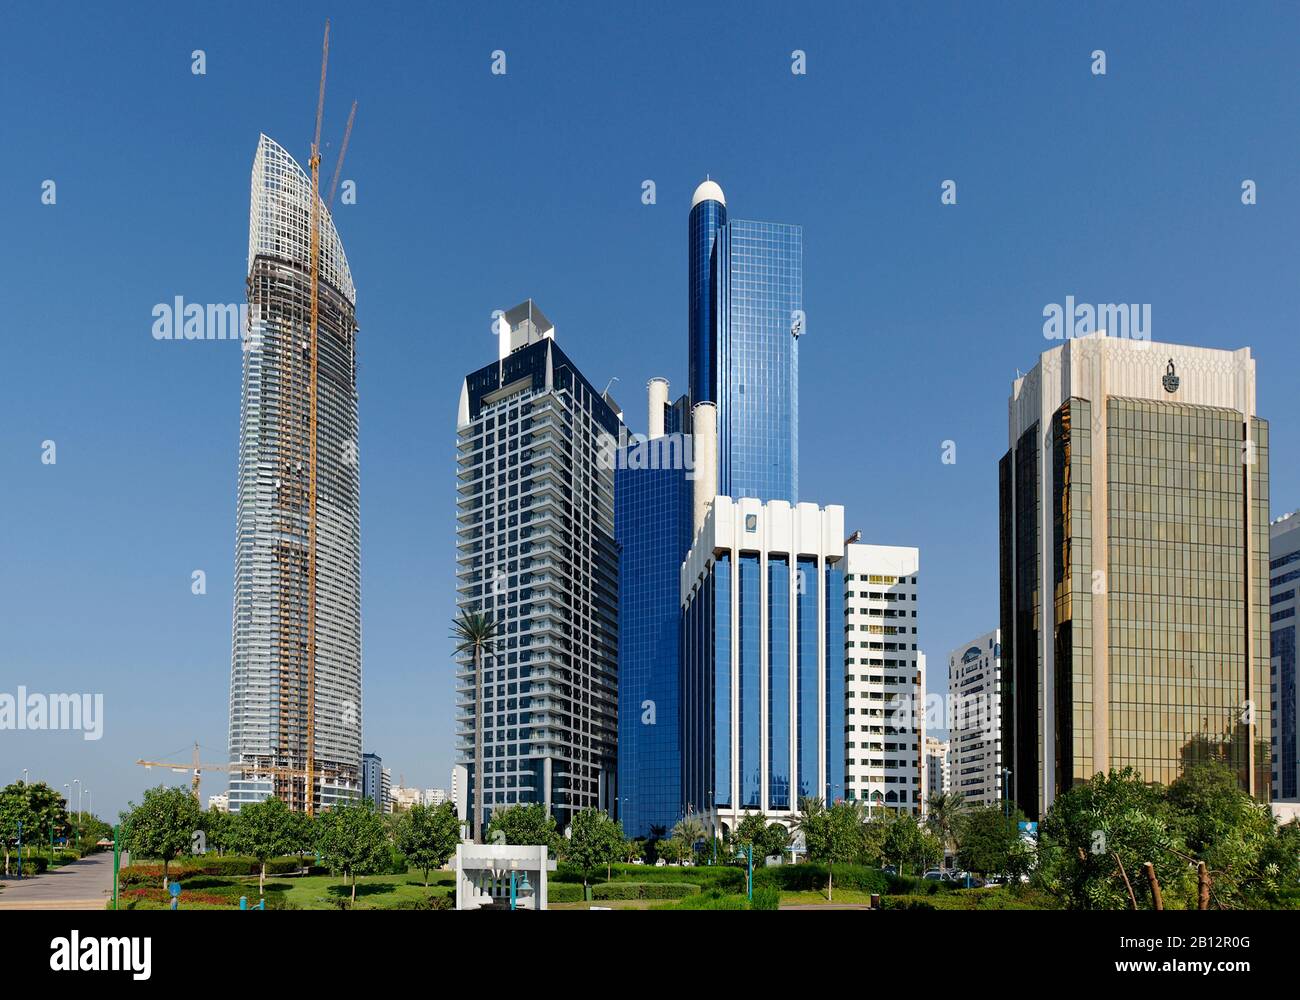 High-rise buildings, office buildings, Abu Dhabi, United Arab Emirates, Middle East, Asia Stock Photo